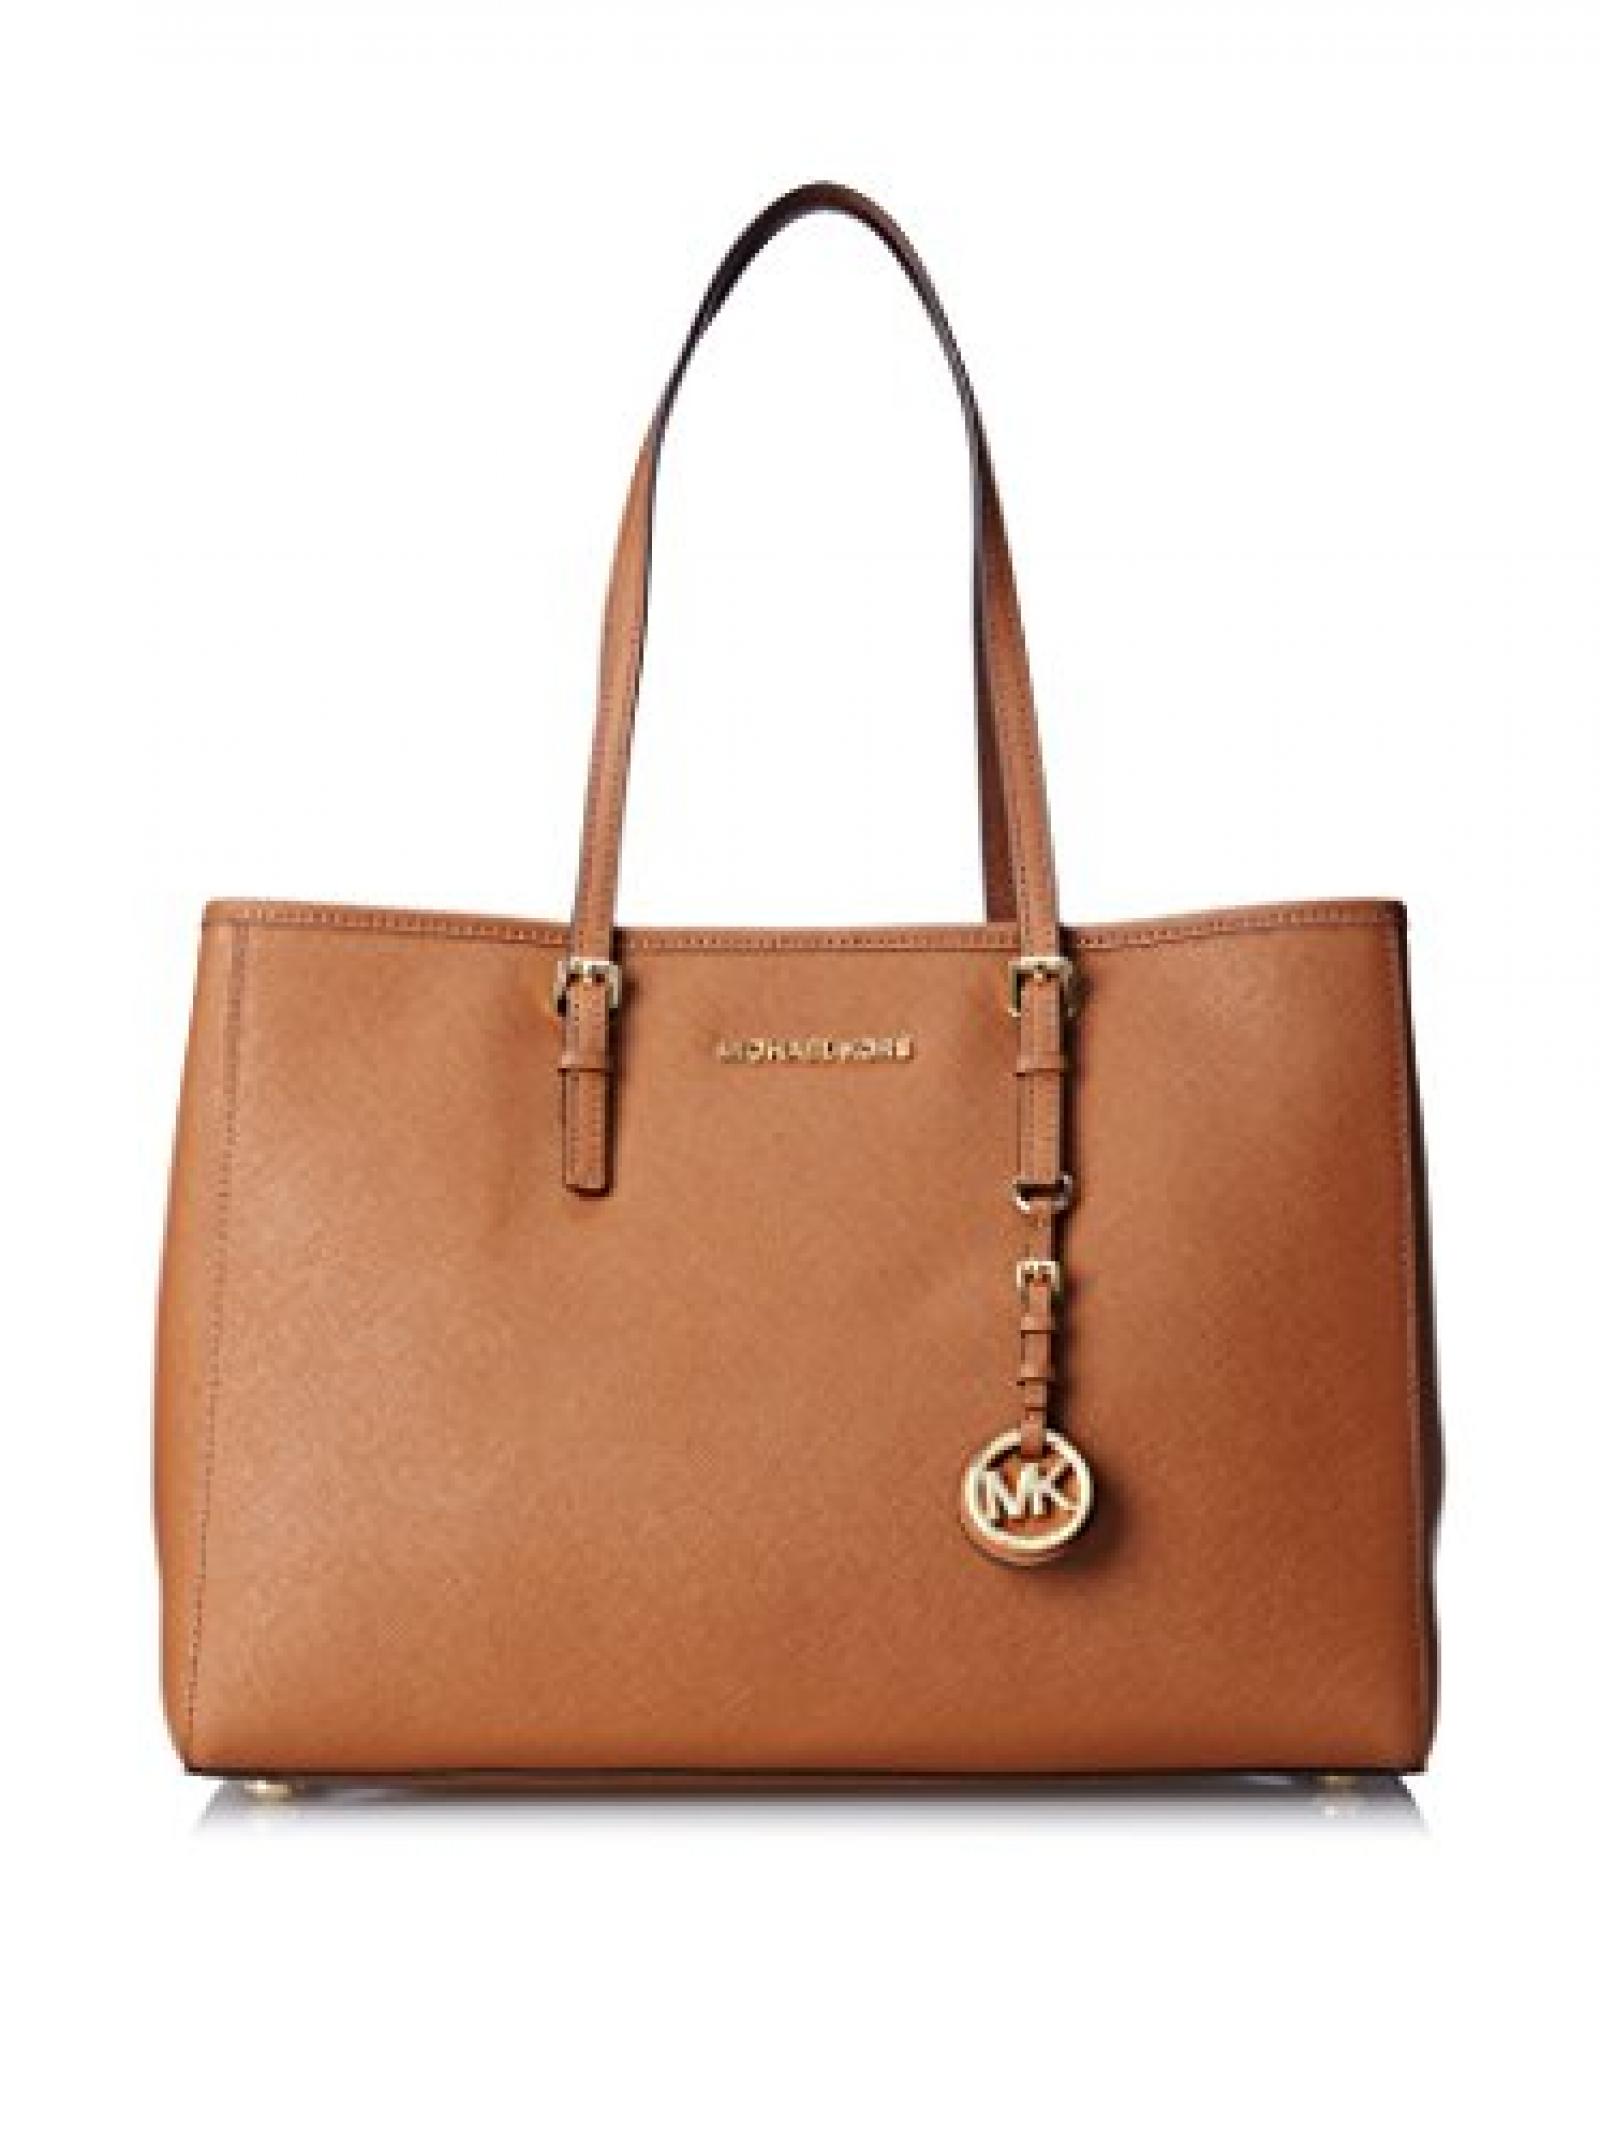 Michael Kors Tote Leather Luggage 